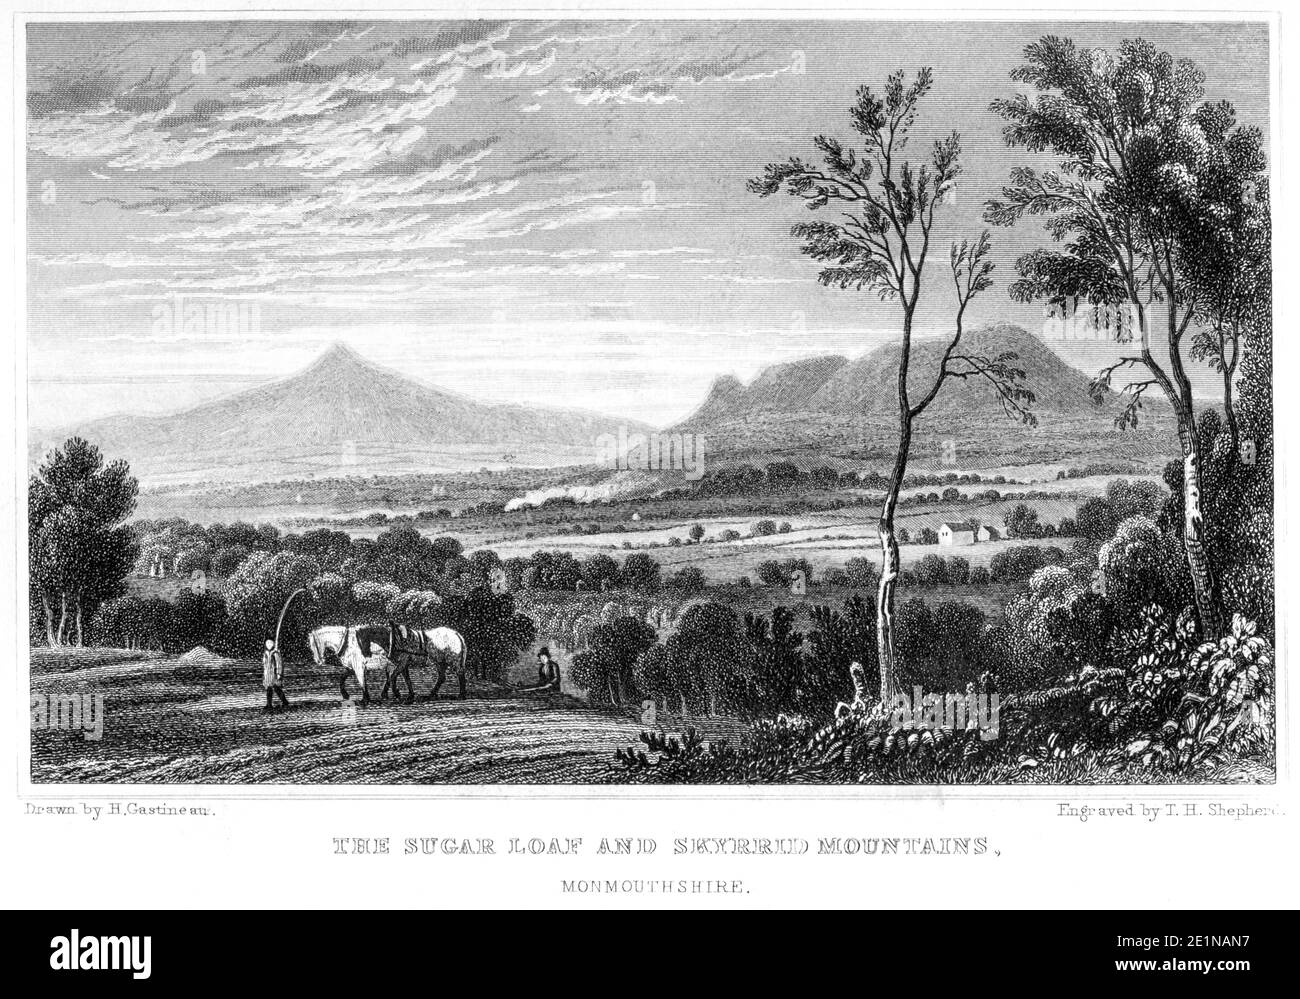 An engraving of The Sugar Loaf and Skyrrid Mountains Monmouthshire scanned at high resolution from a book published in 1854. Believed copyright free. Stock Photo